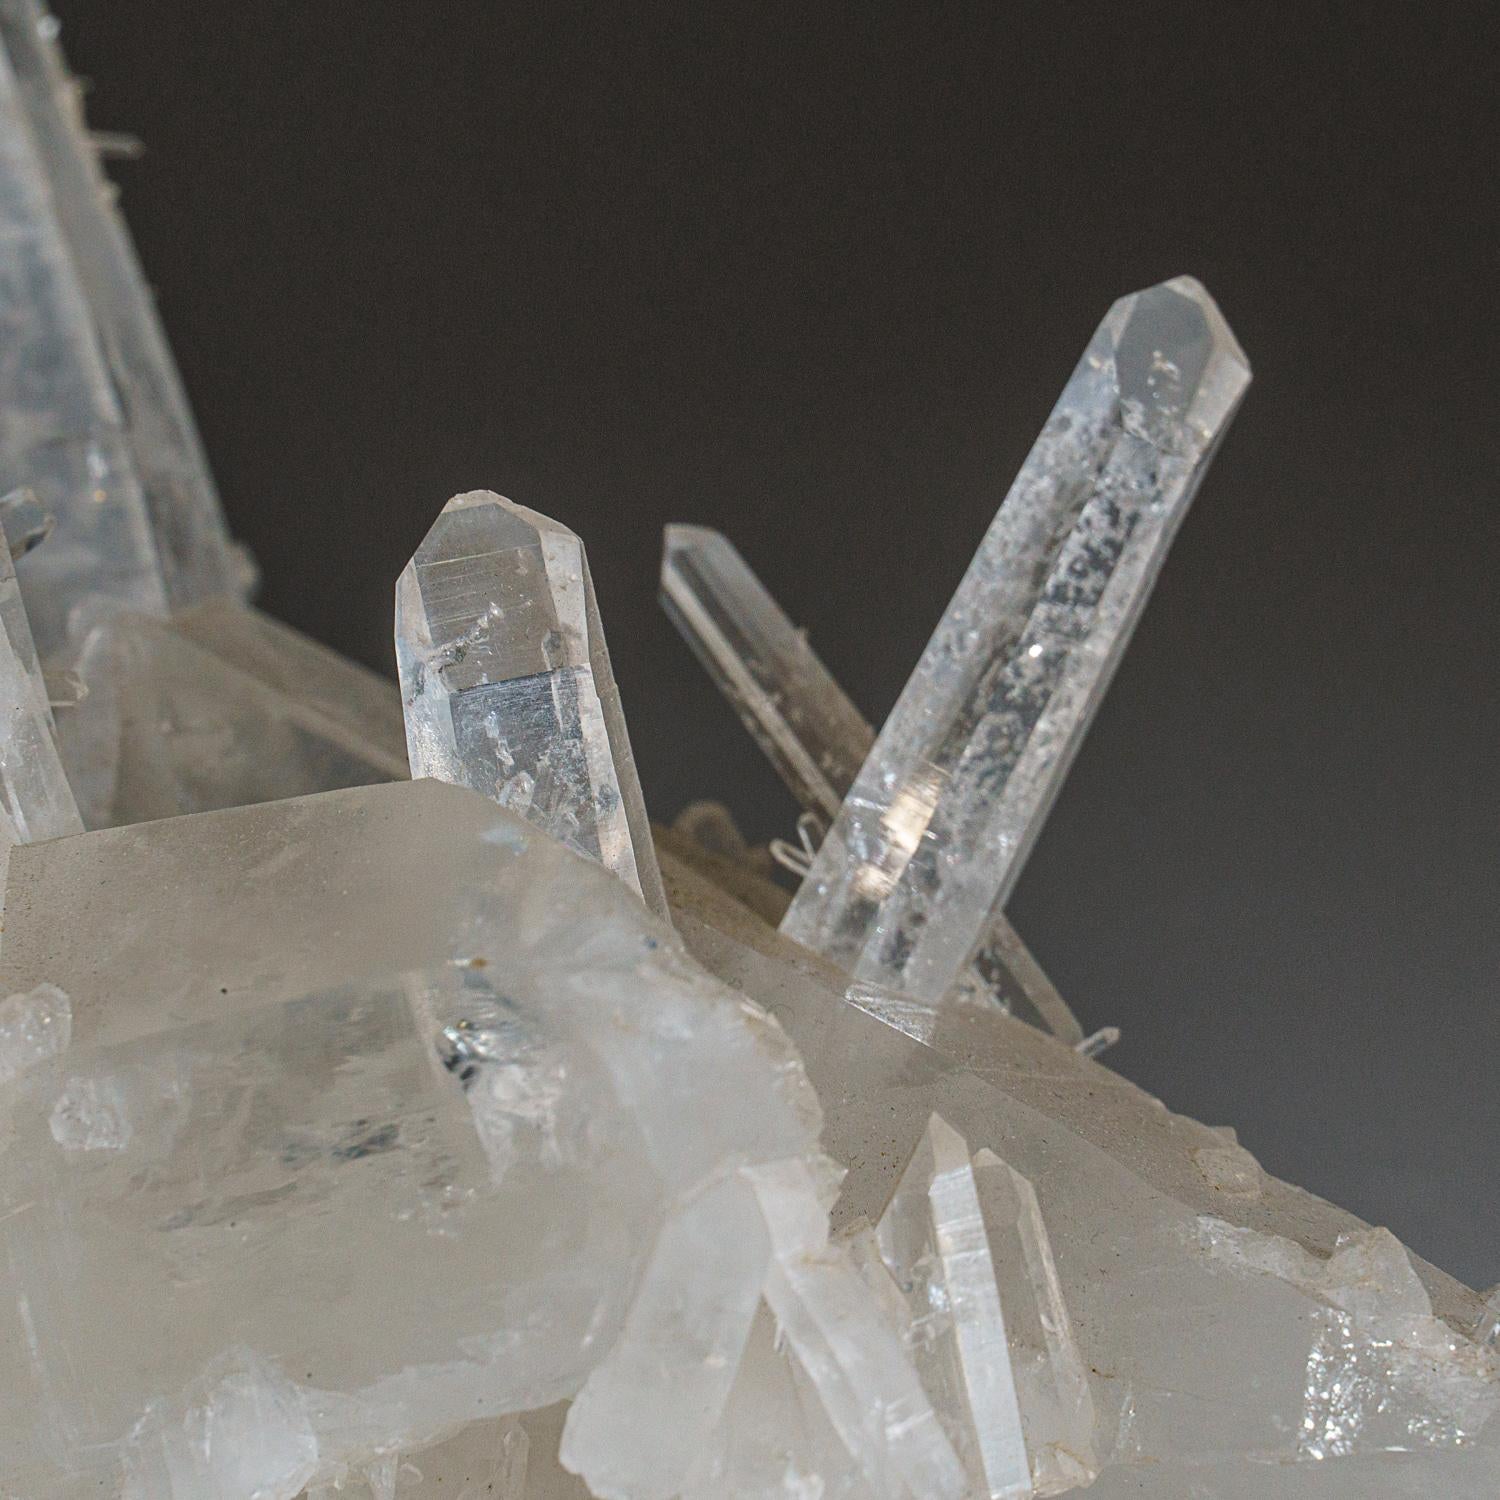 From Ouachita Mountains, Montgomery County, ArkansasAesthetic cluster of many intersecting cross-like crystals of colorless, transparent quartz. This locality is famous for these formation, commonly called solution quartz. The quartz crystals have